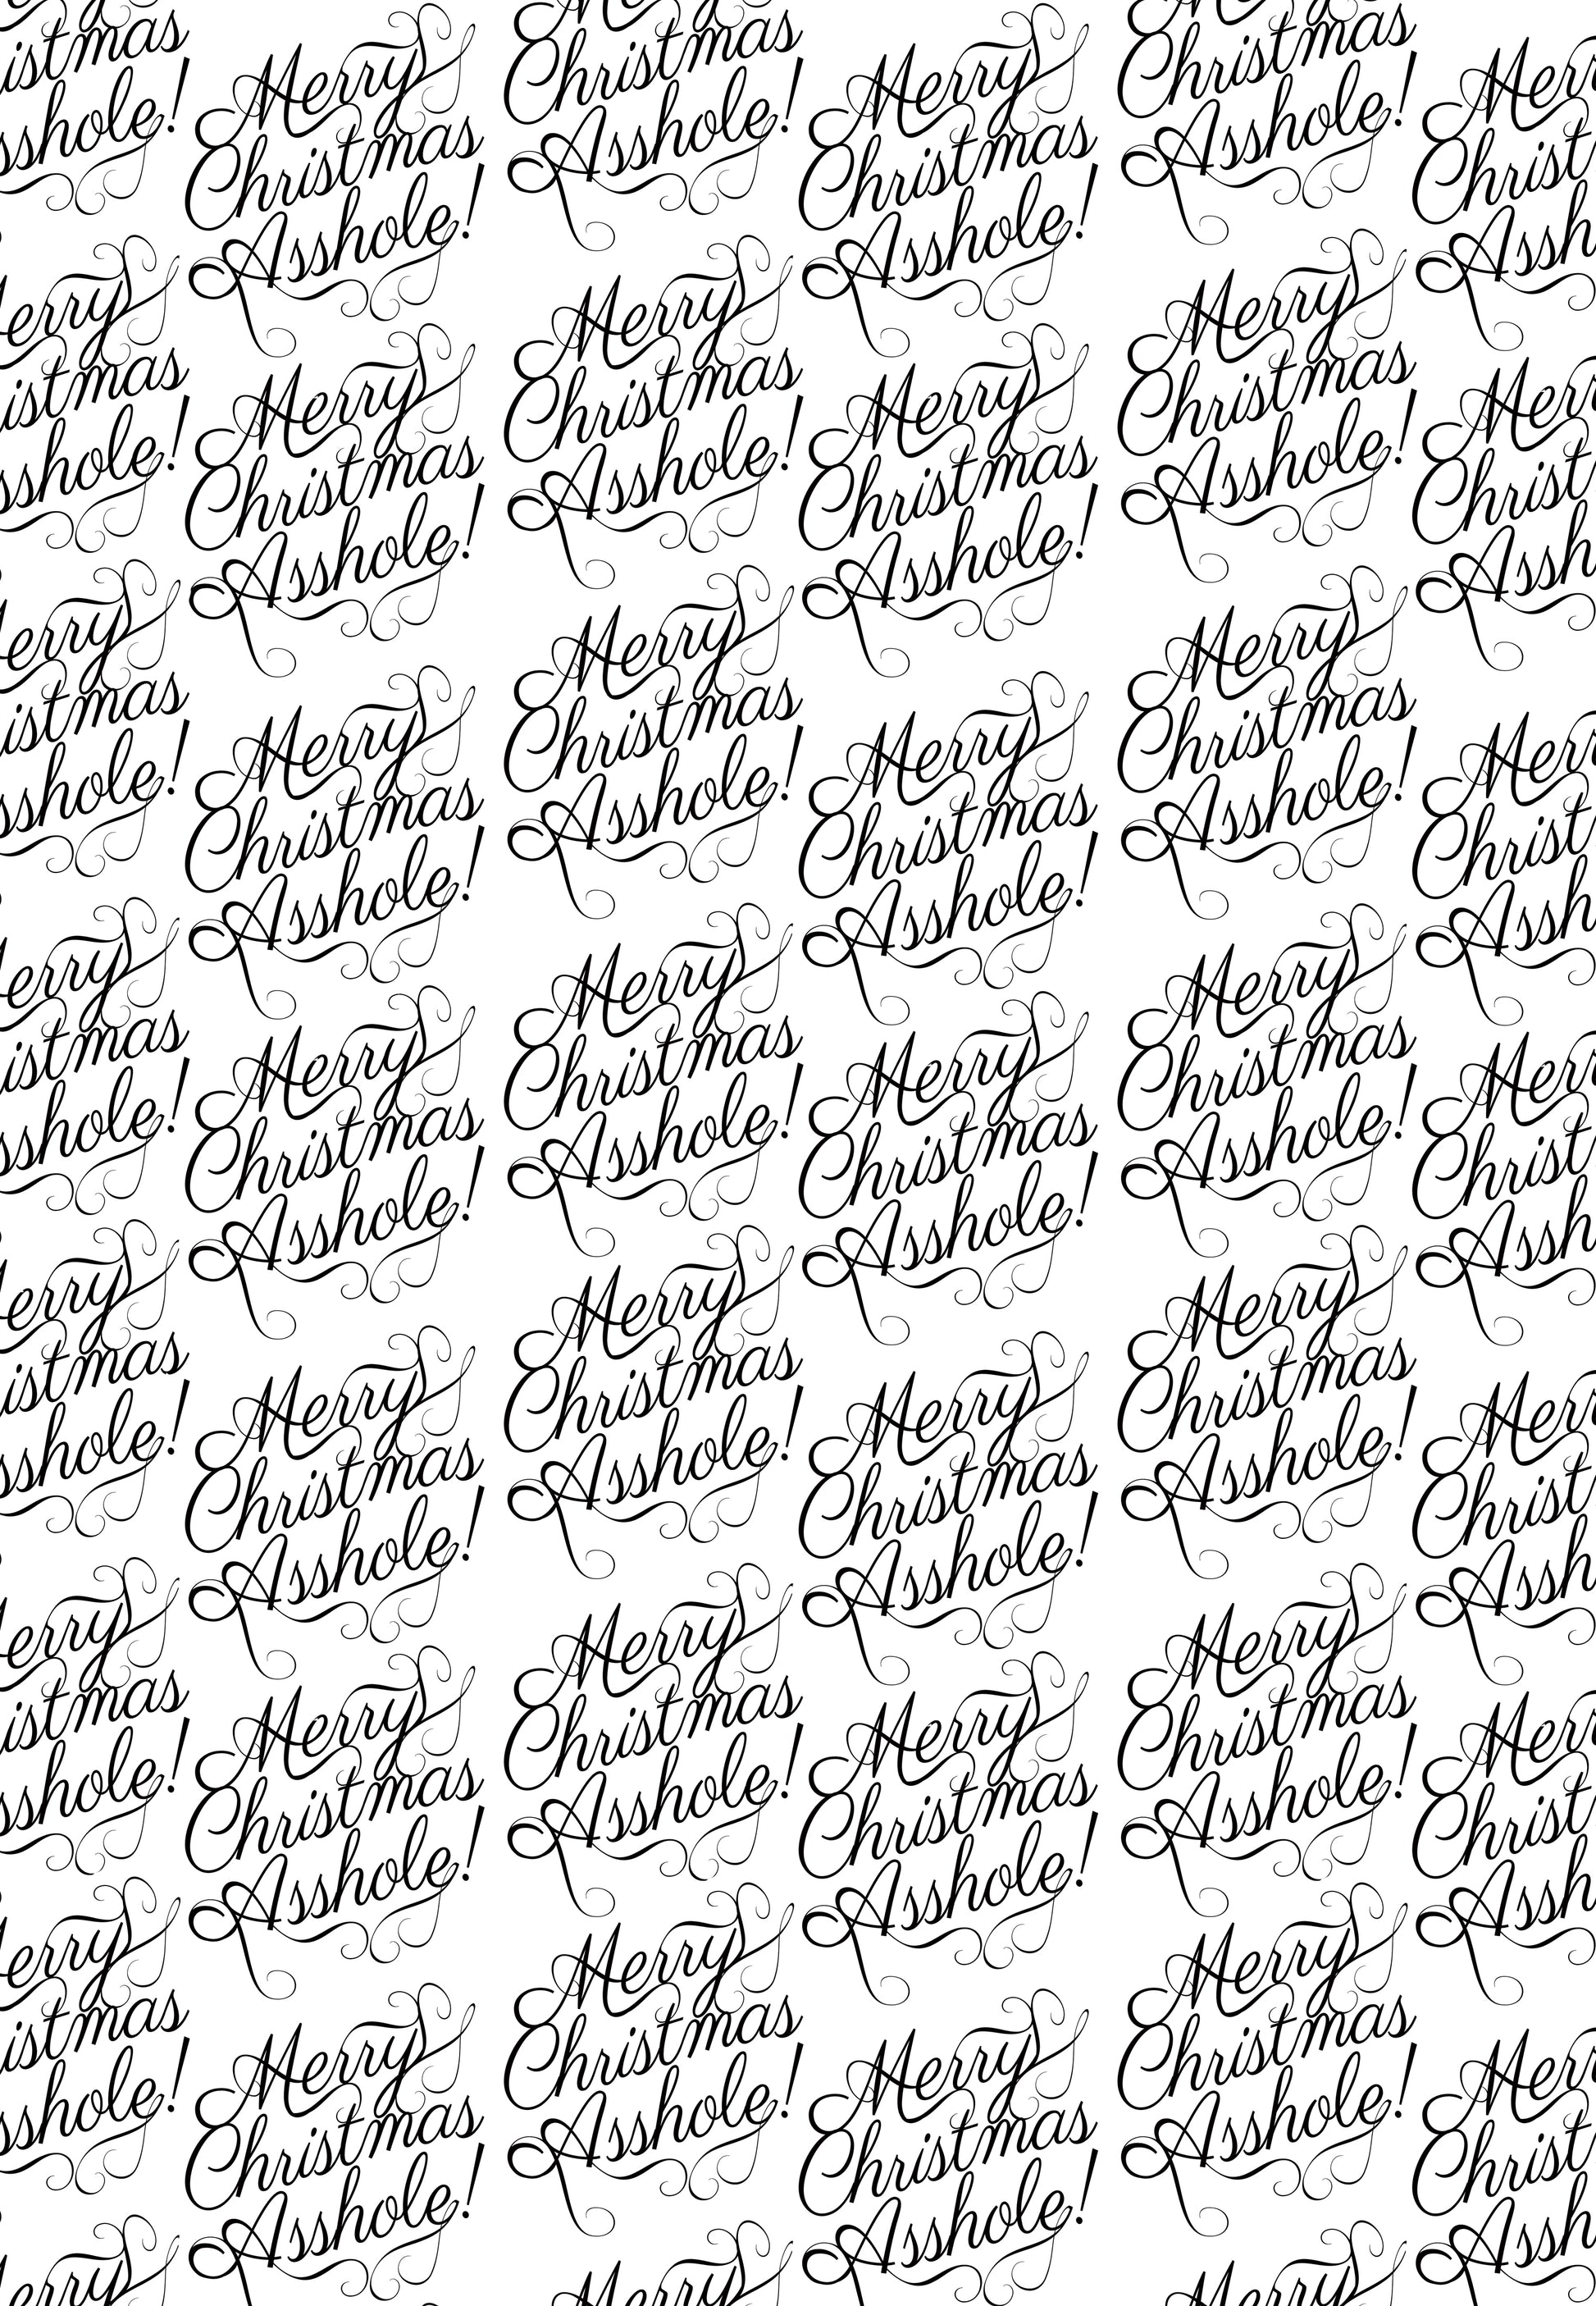 gift wrap sheet merry christmas asshole cuss word fun silly holiday white background with black cursive words high quality